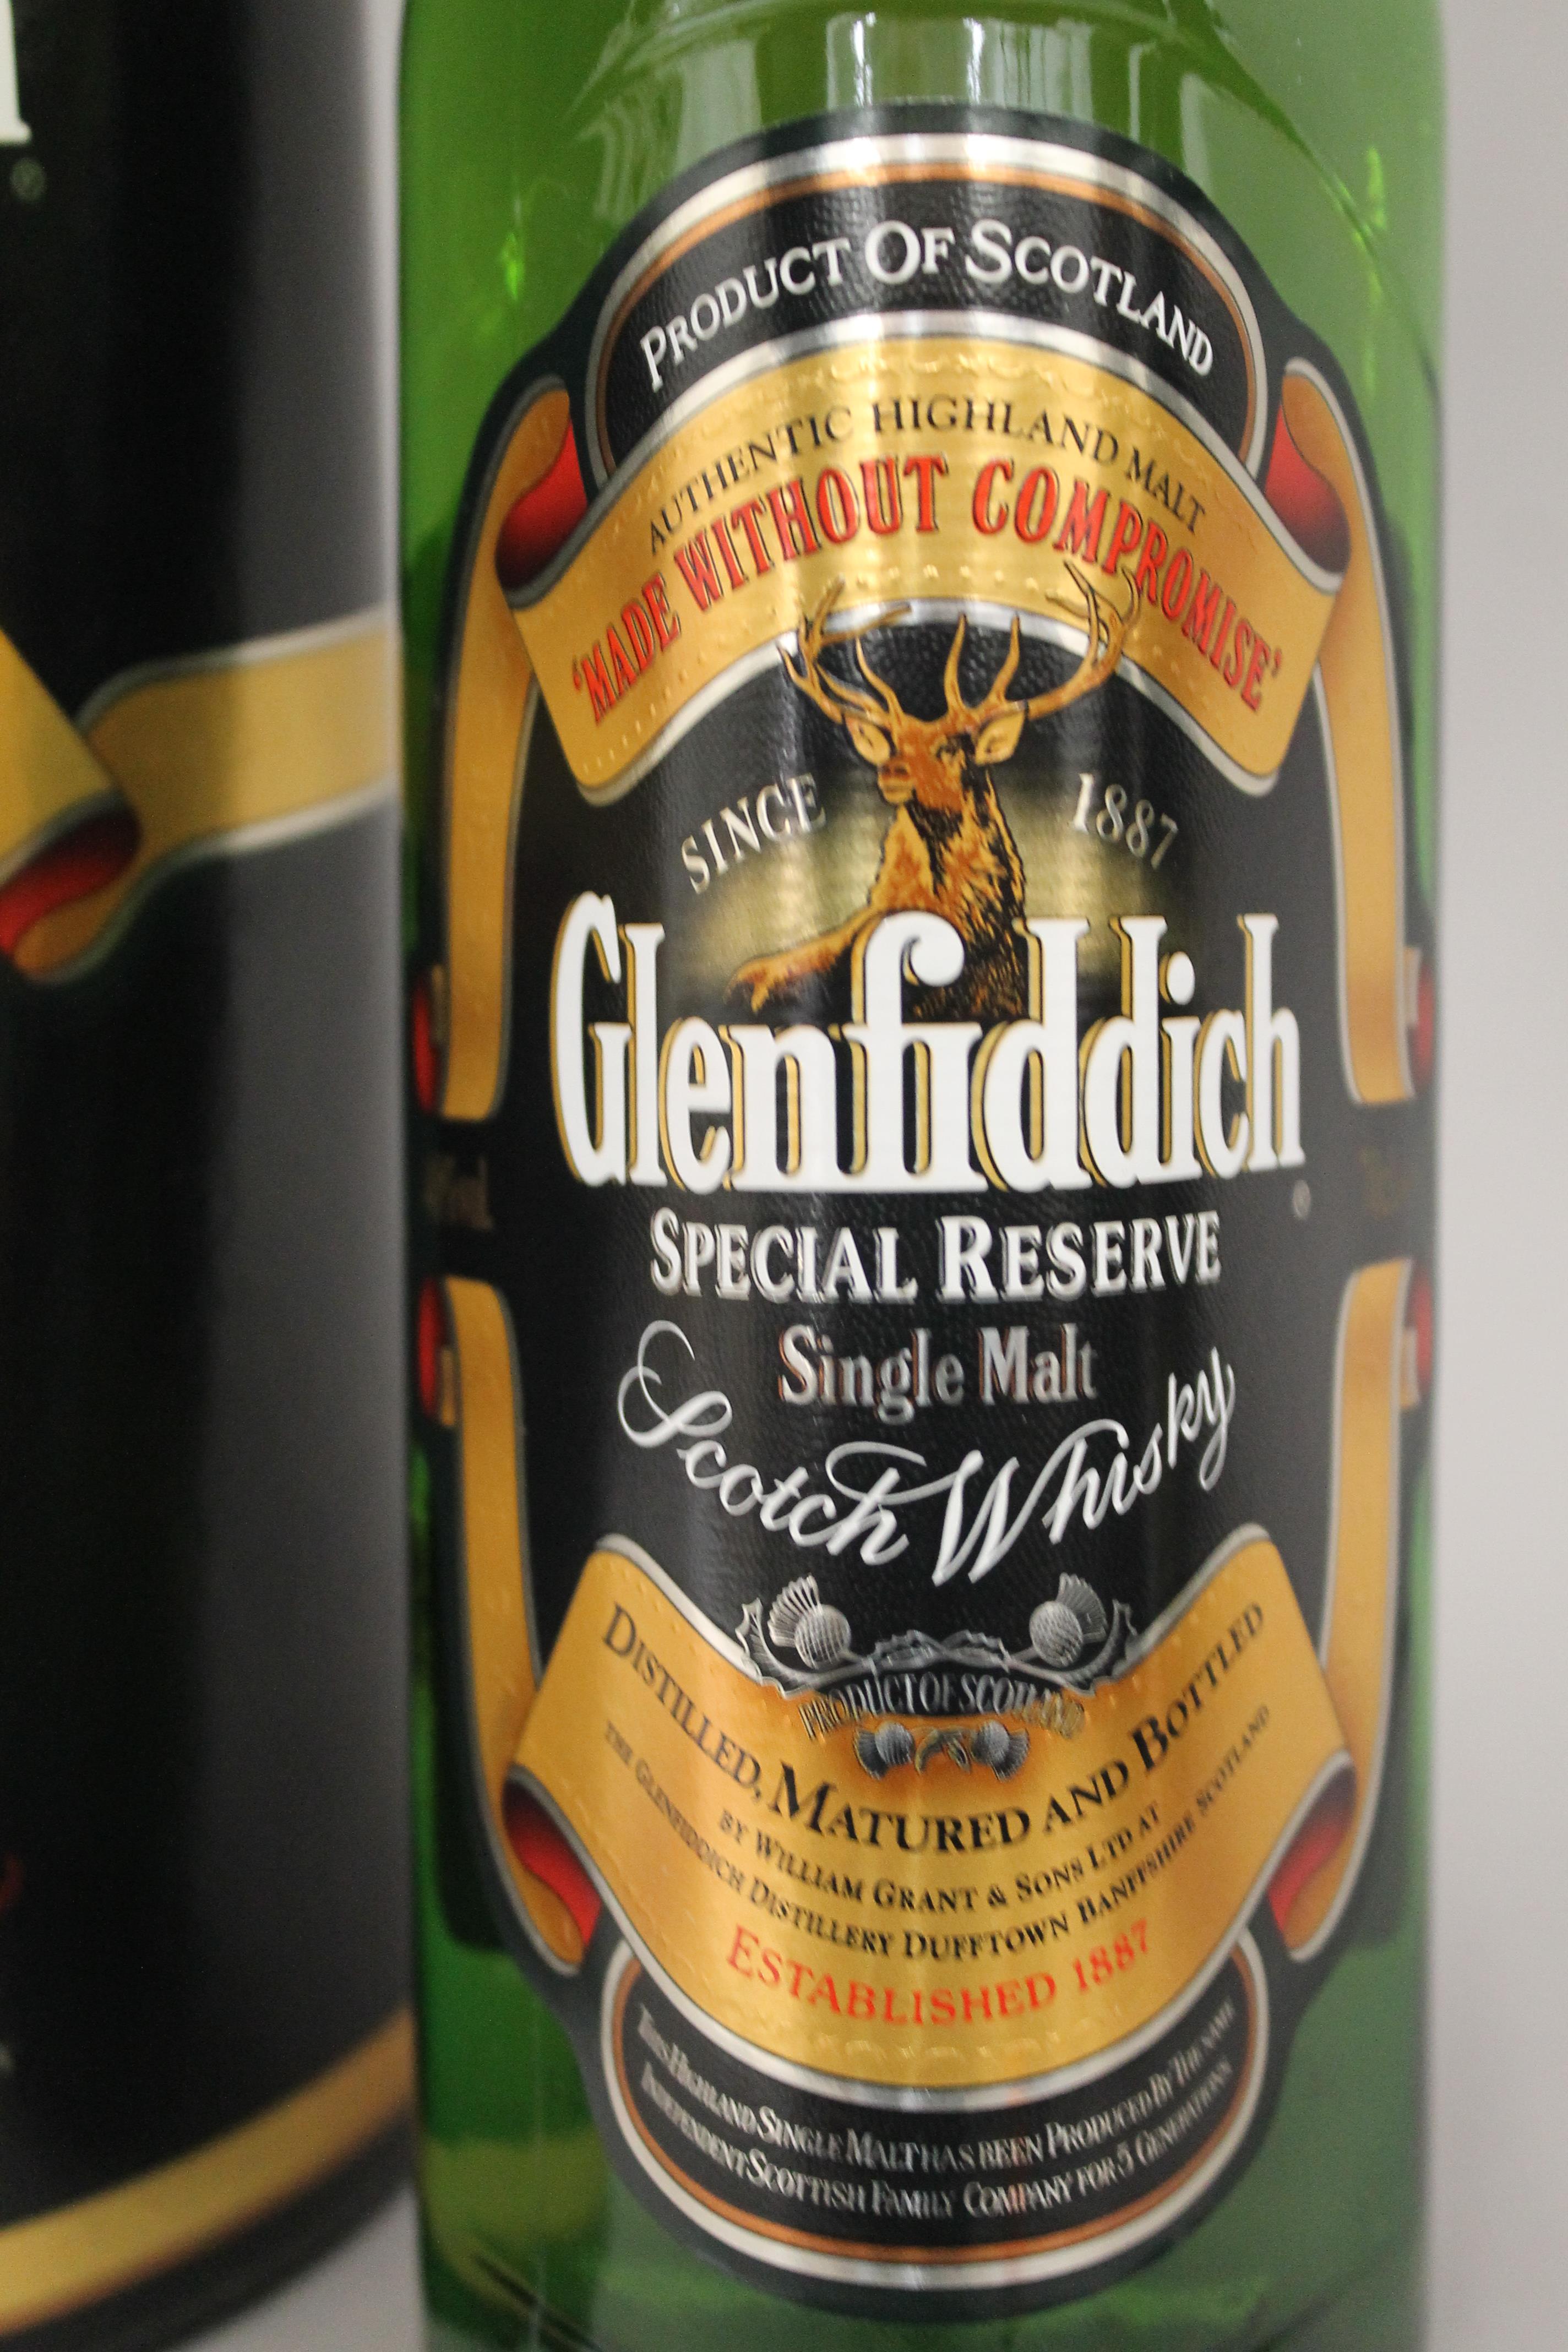 A bottle of Glenfiddich Special Reserve Single Malt Scotch Whisky, boxed. - Image 2 of 2